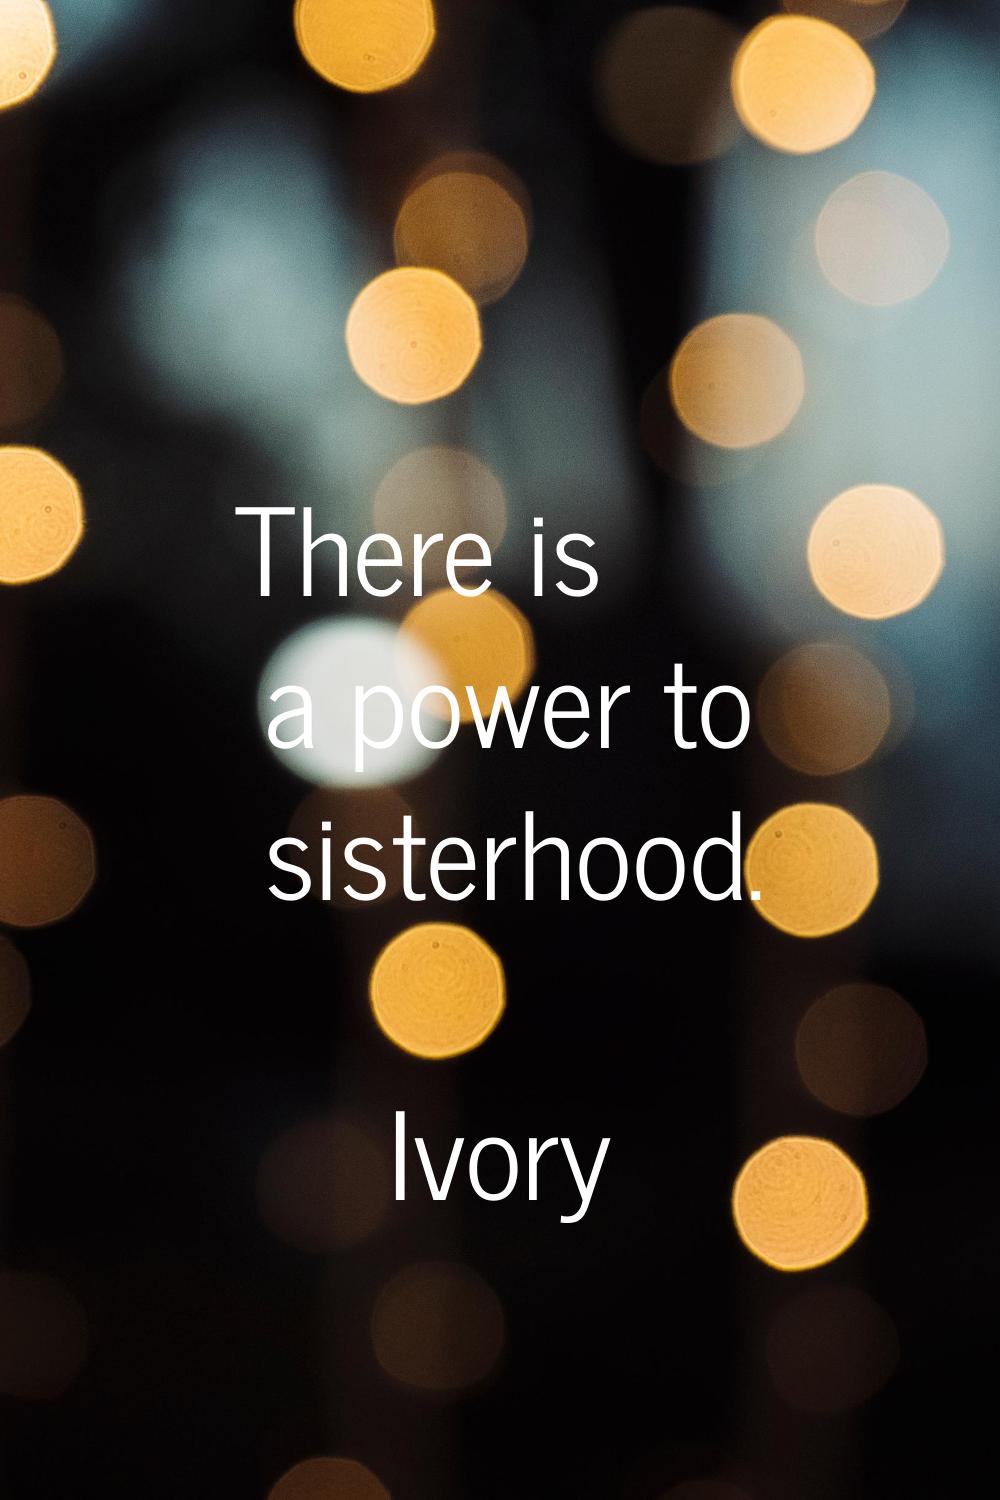 There is a power to sisterhood.